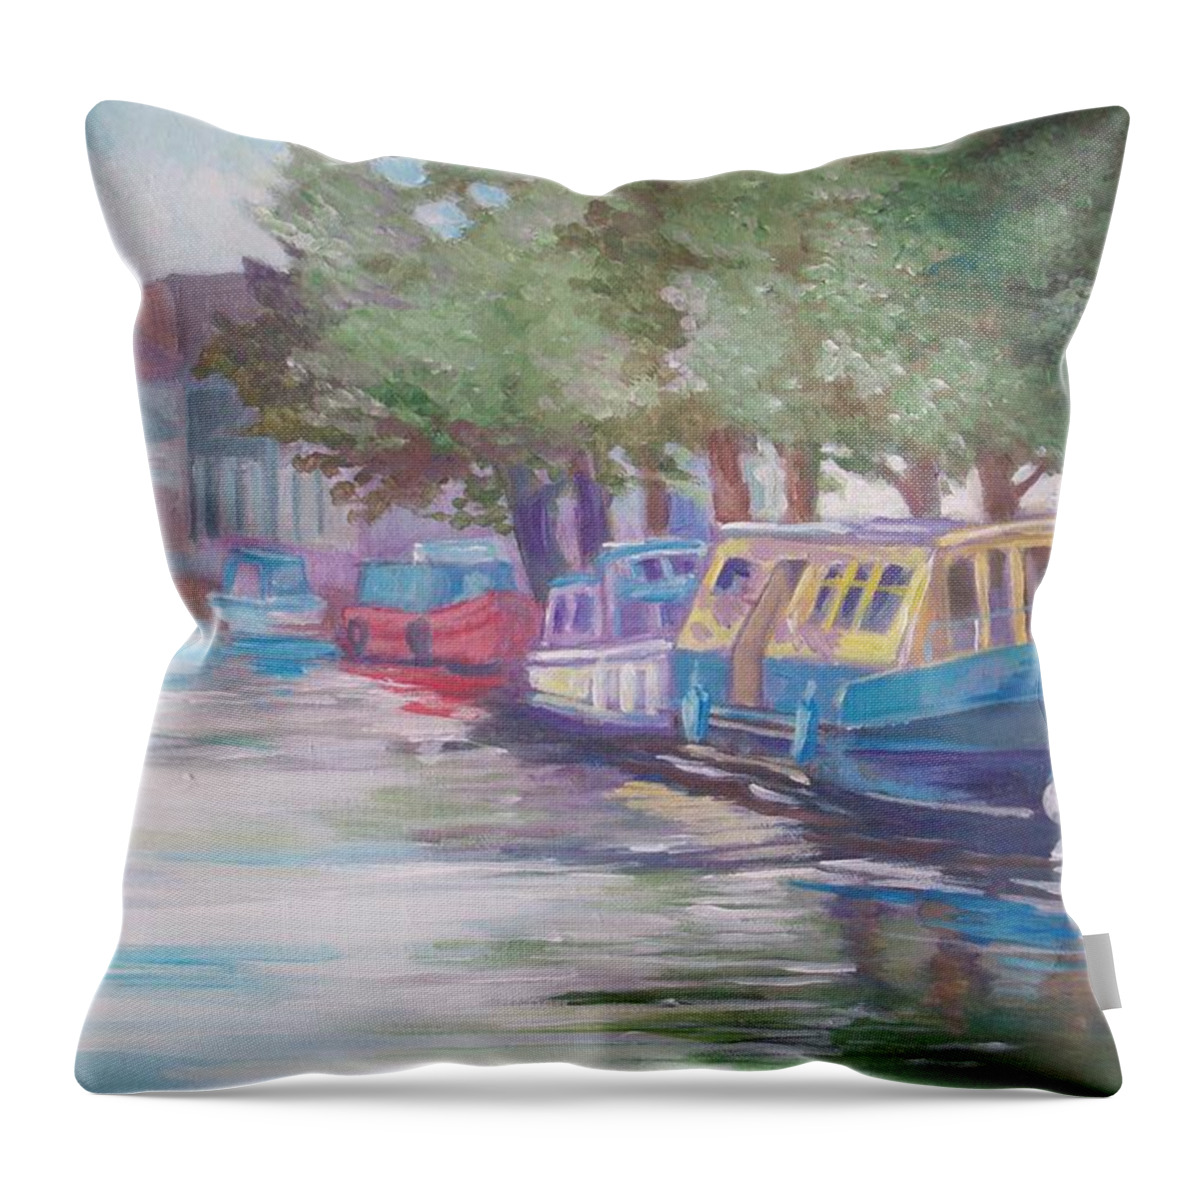 Canal Throw Pillow featuring the painting Tullamore Co Offaly by Paul Weerasekera